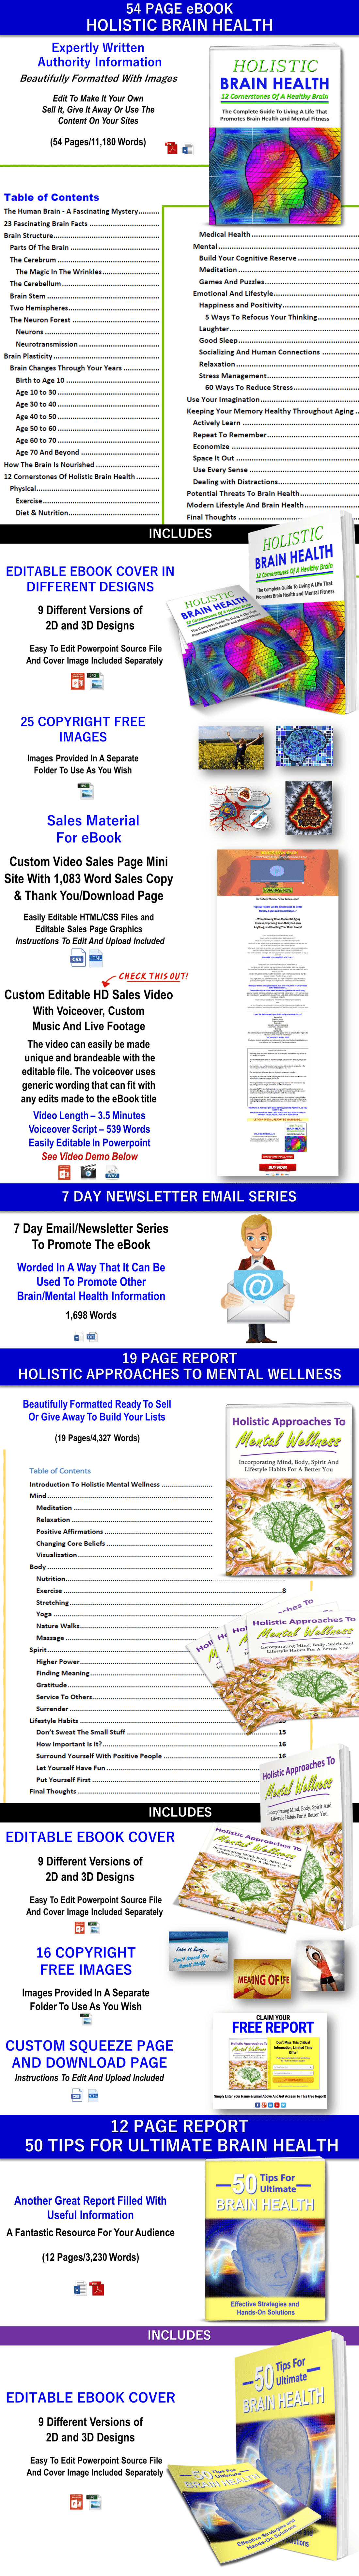 Brain Health, Meditation And Mindfulenss Content With PLR Rights